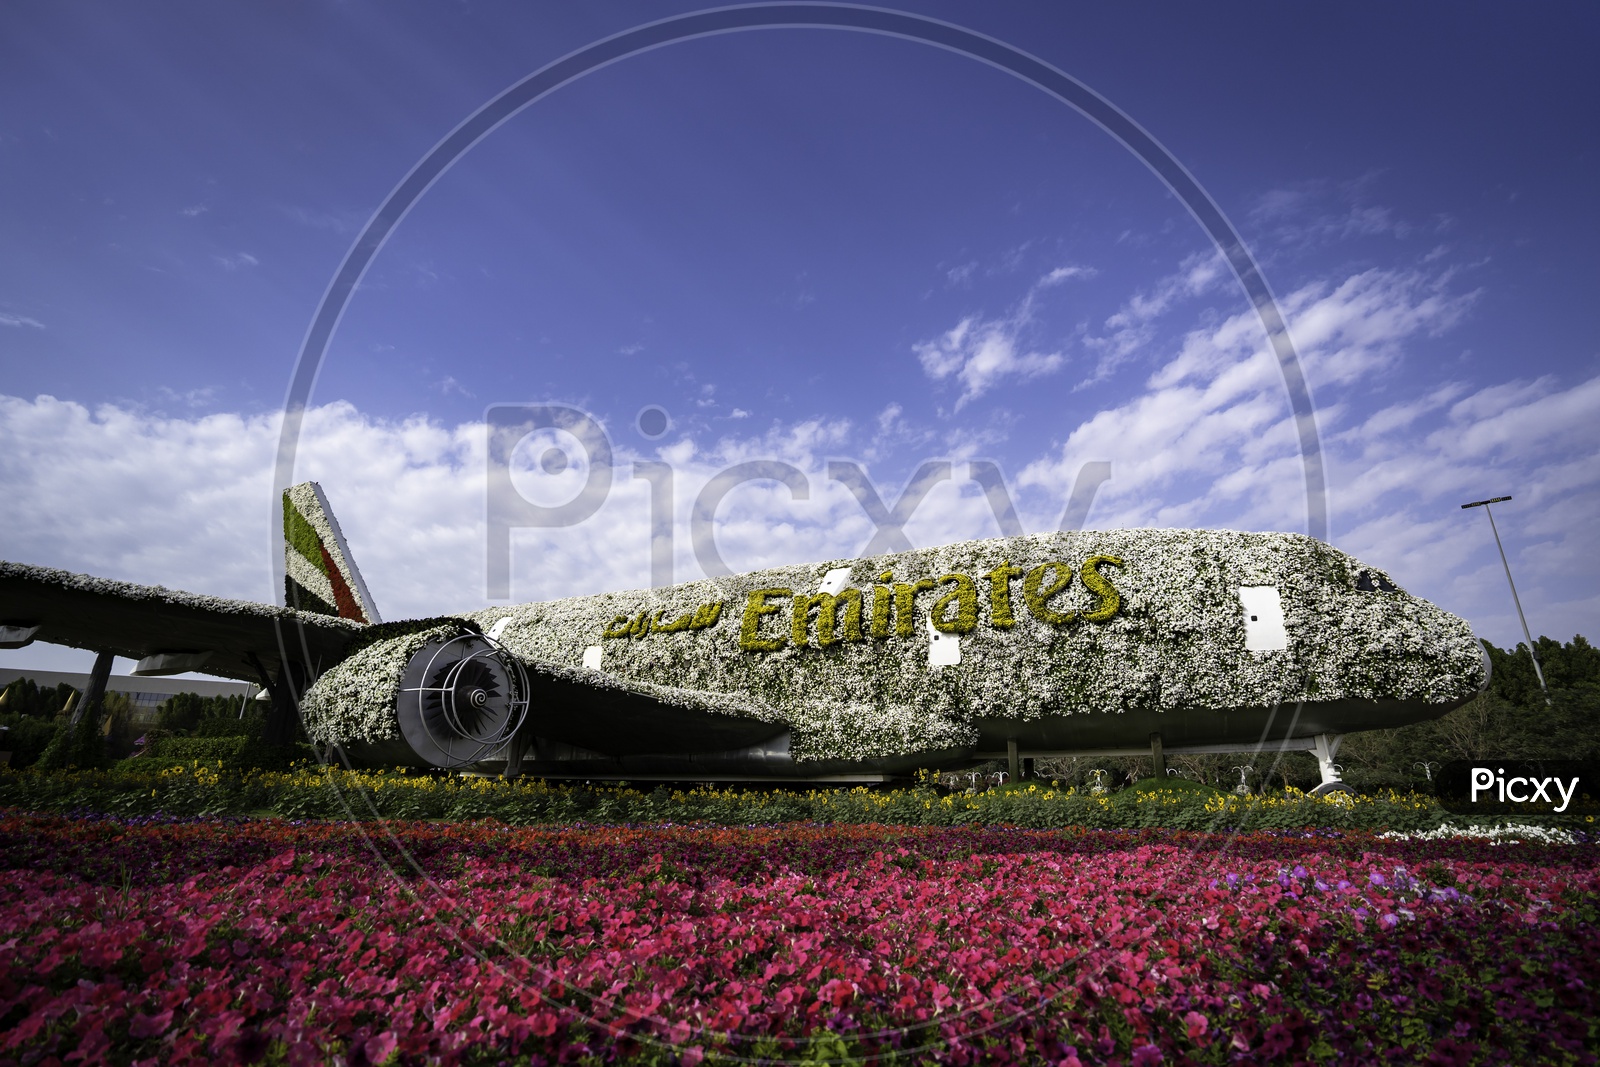 Emirates model plane with flowers at Miracle garden, Dubai